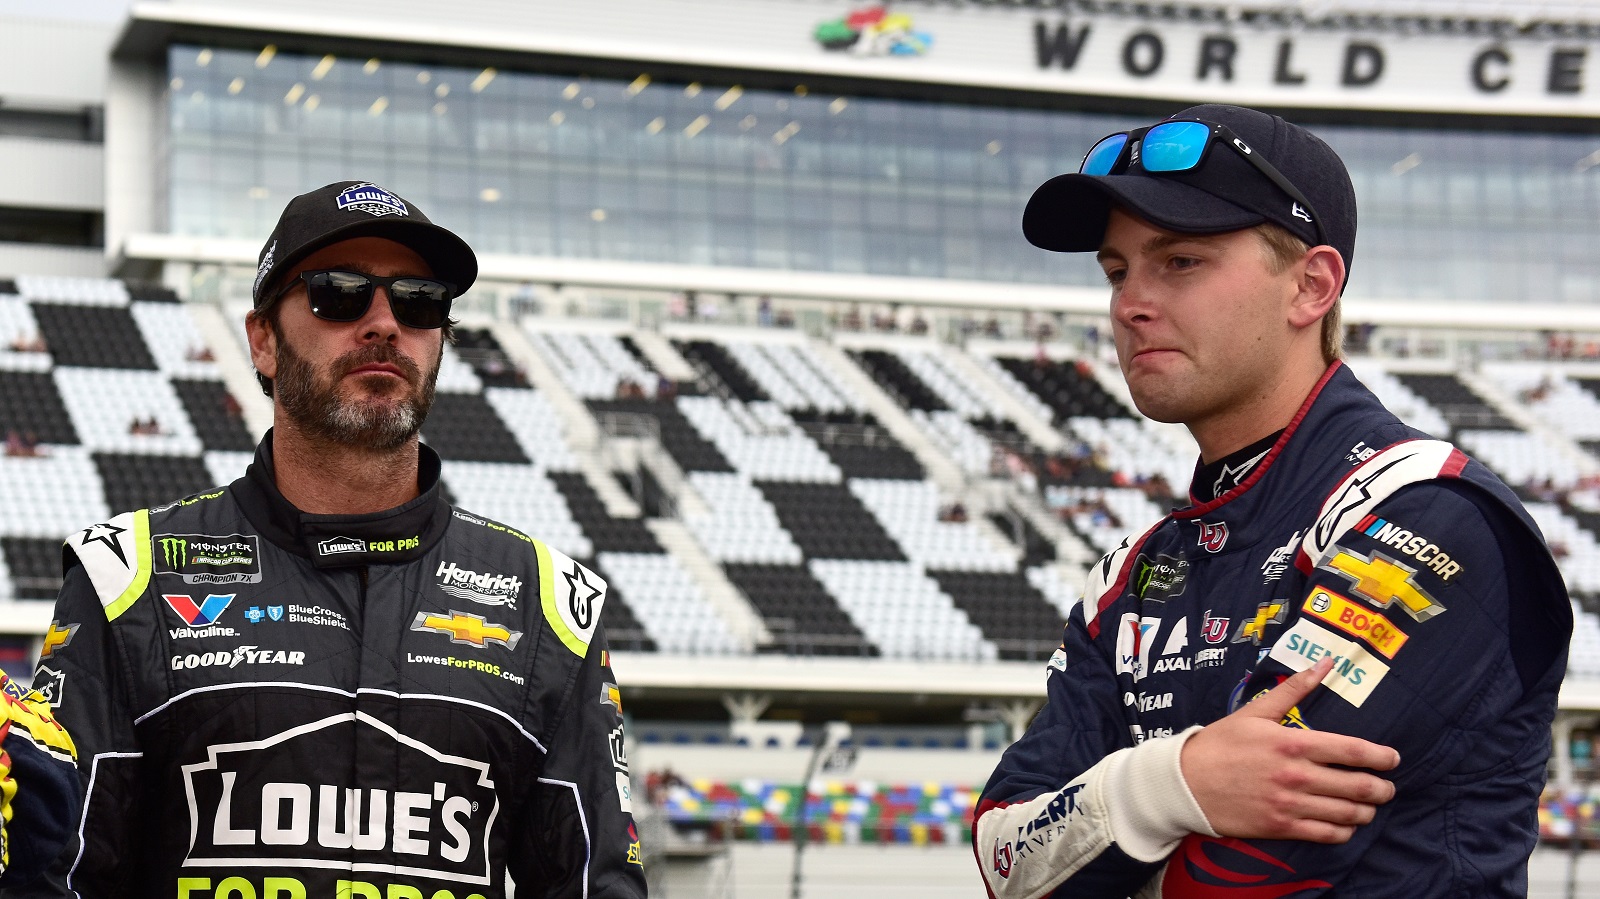 Jimmie Johnson and William Byron talk during qualifying for the Monster Energy NASCAR Cup Series Coke Zero Sugar 400 at Daytona International Speedway on July 6, 2018.